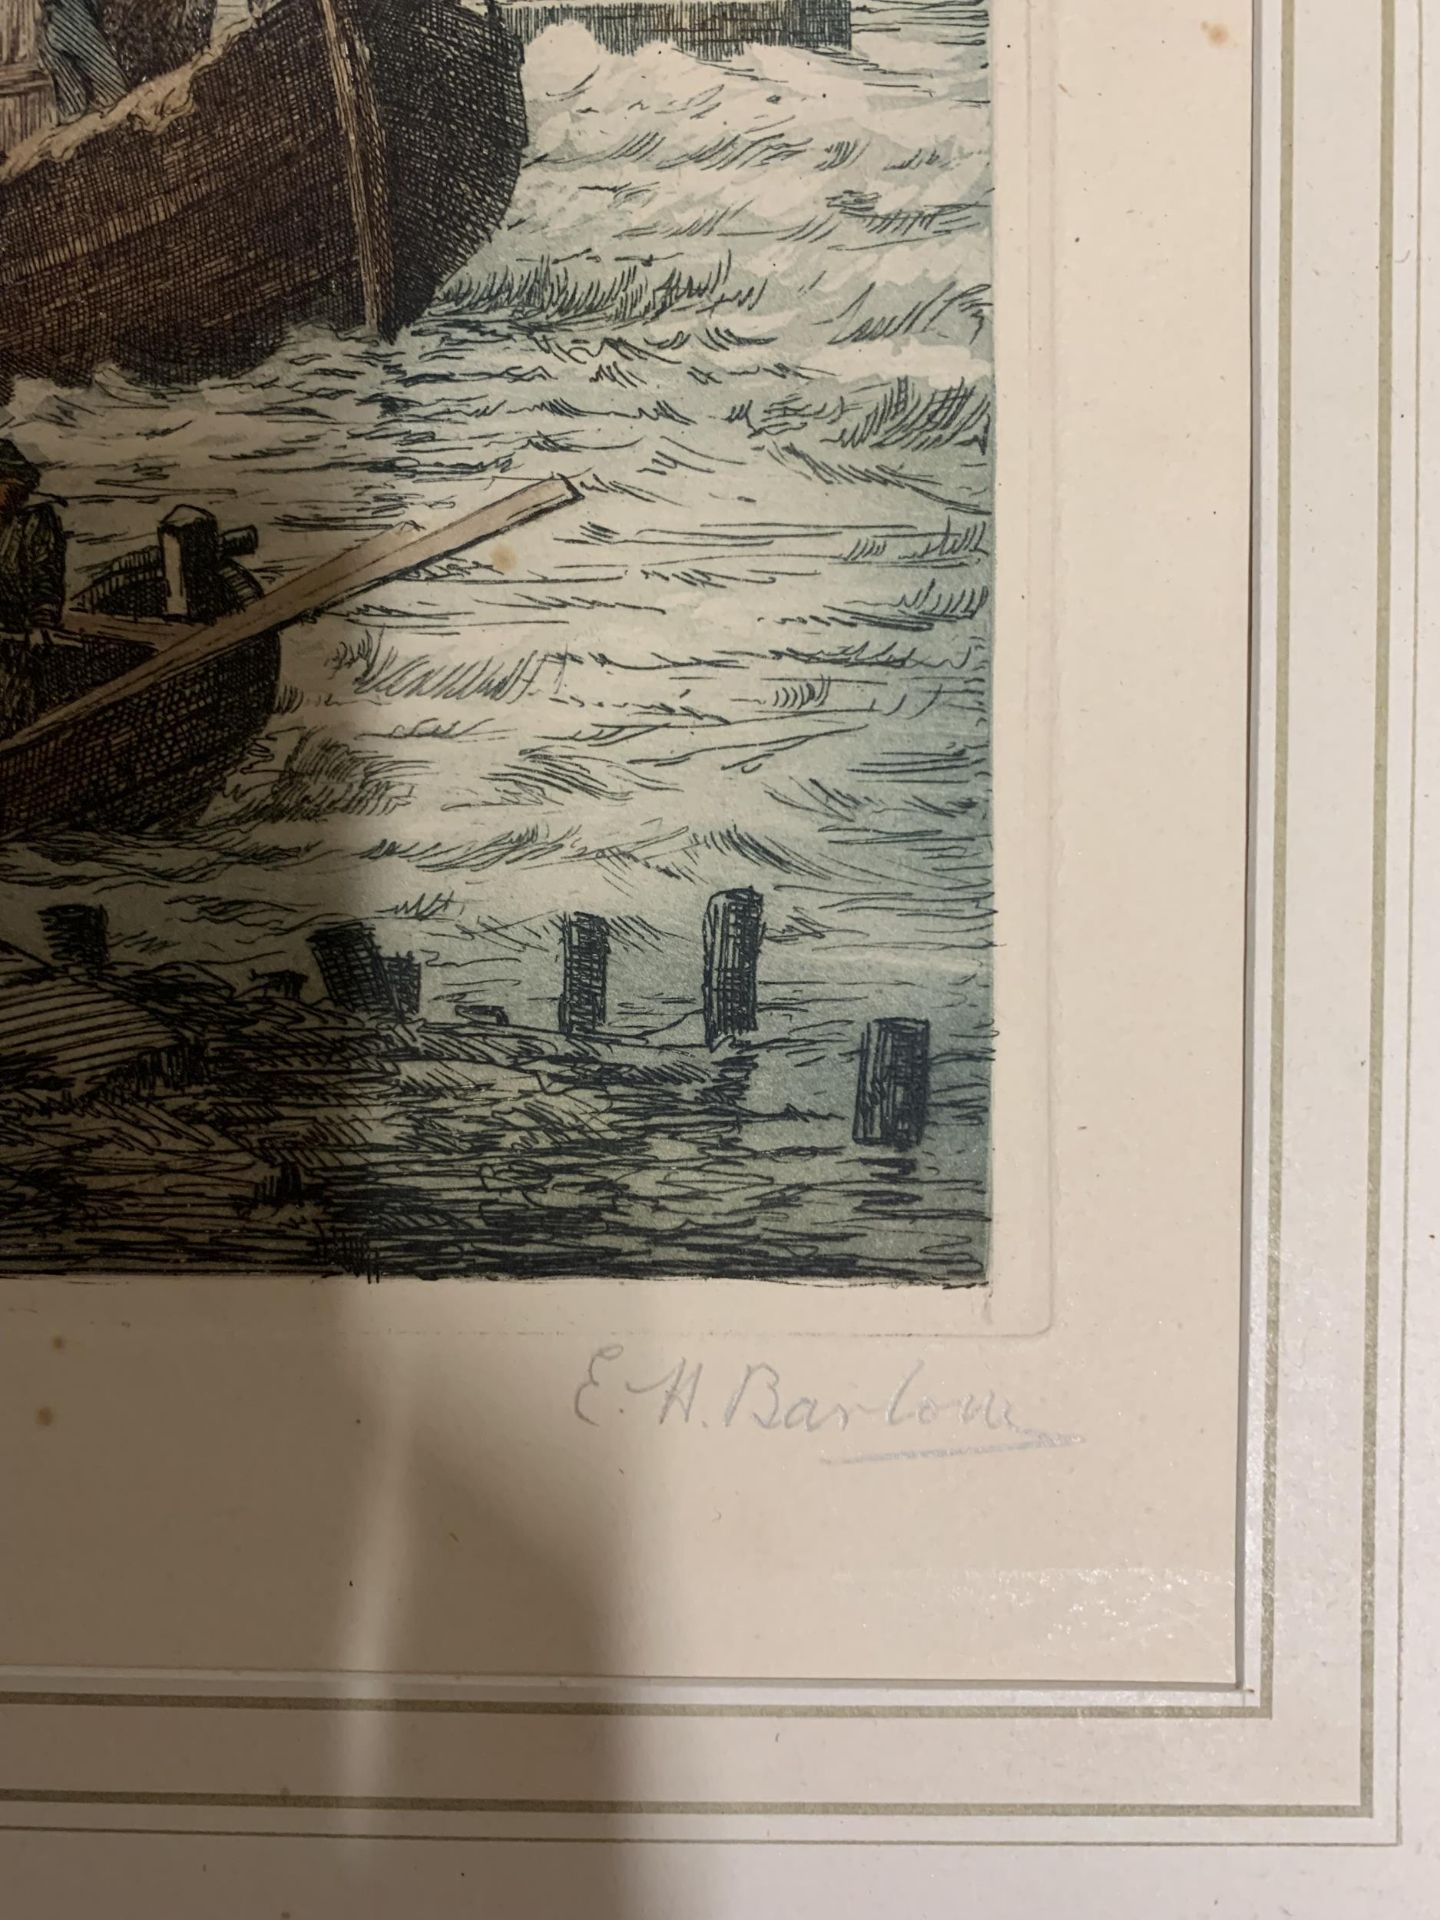 A GROUP OF E.H. BARLOW PENCIL SIGNED ENGRAVINGS OF COASTAL TOWN SCENES - Image 3 of 3